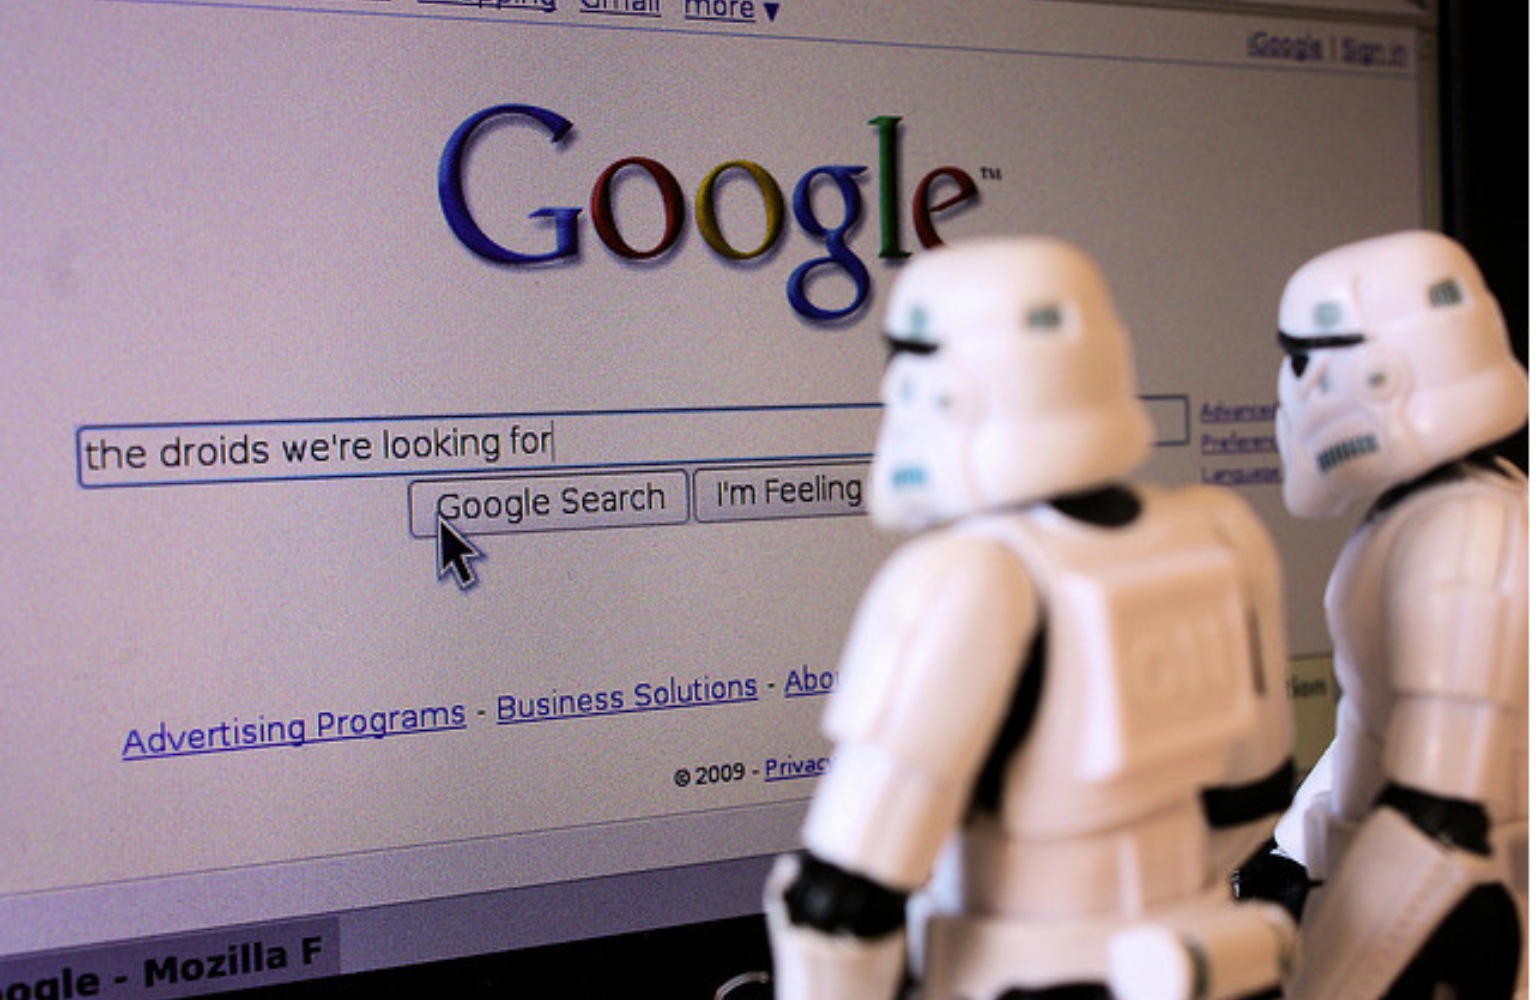 google-is-pushing-to-encrypt-more-of-its-services-image-cultofandroidcomwp-contentuploads201511star-wars-humour-the-droids-were-looking-for-stormtroopers-use-google-search-jpg